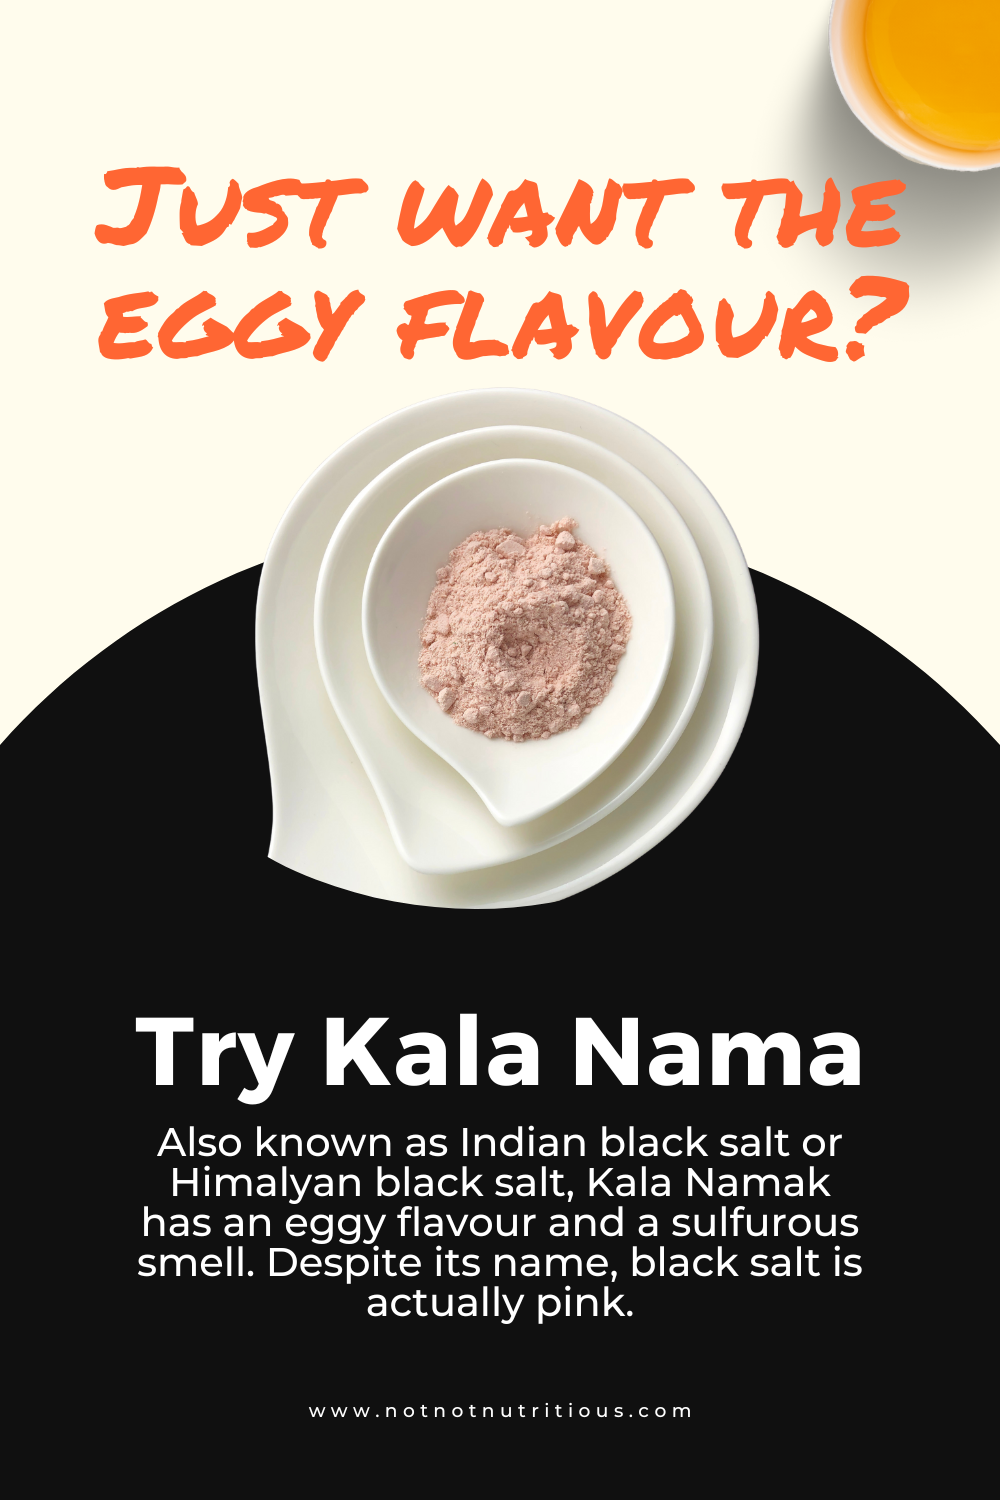 Infographic: Just want the eggy flavour? Try Kala Namak